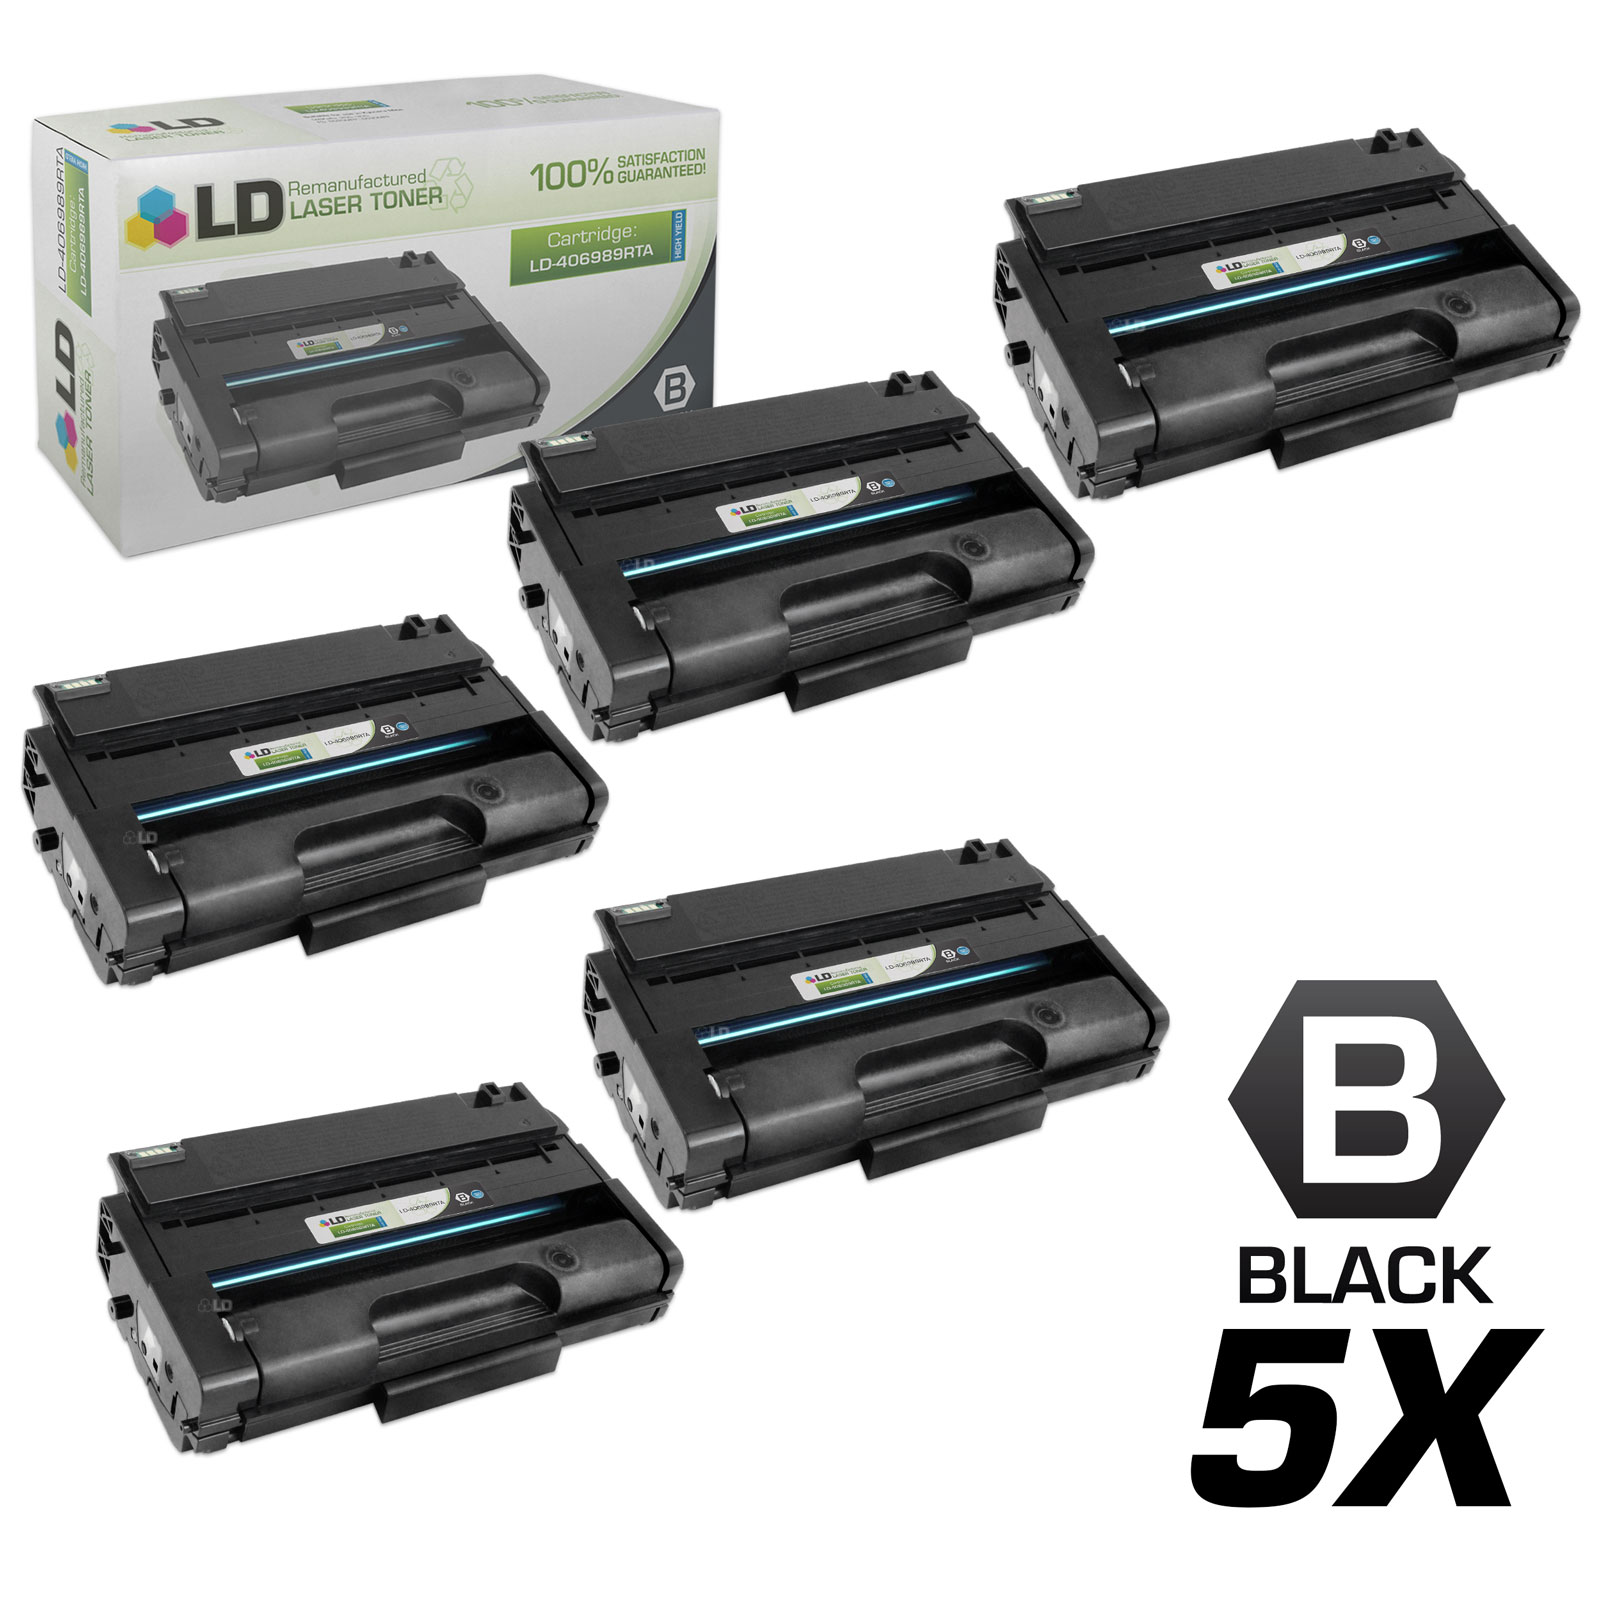 LD Remanufactured Replacements for Ricoh 406989 Set of 5 High Yield Black Laser Toner Cartridges for use in Ricoh Aficio SP 3500DN, 3500N, 3500SF, 3510DN, and 3510SF s - image 1 of 6